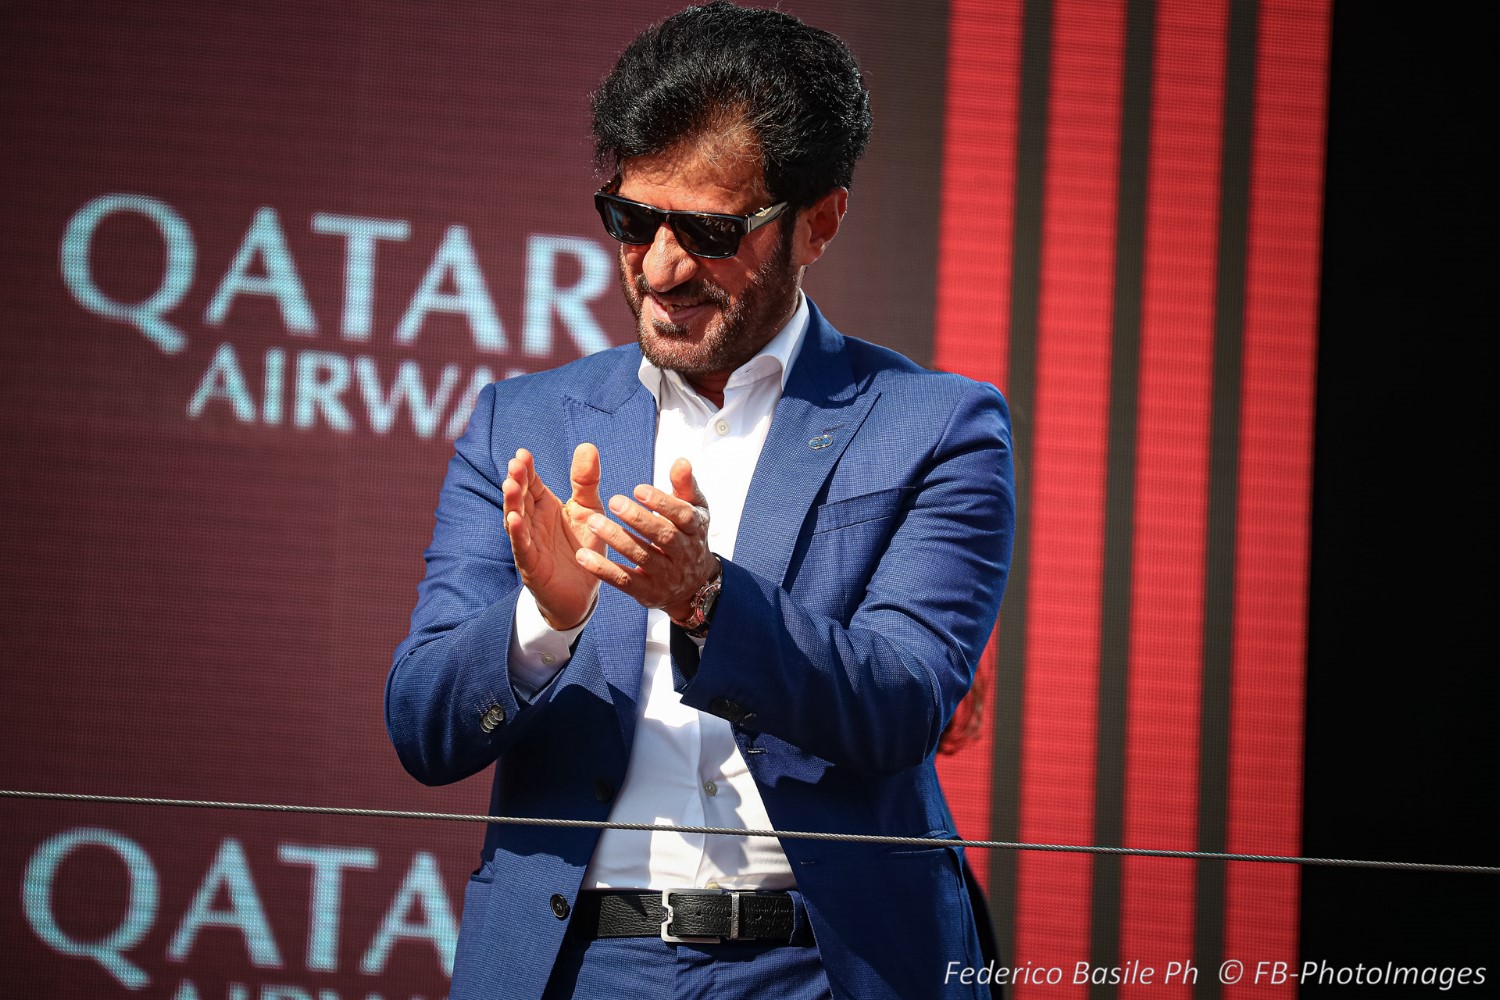 Mohammed Ben Sulayem FIA President during the Hungarian GP, Budapest 20-23 July 2023 at the Hungaroring, Formula 1 World championship 2023.